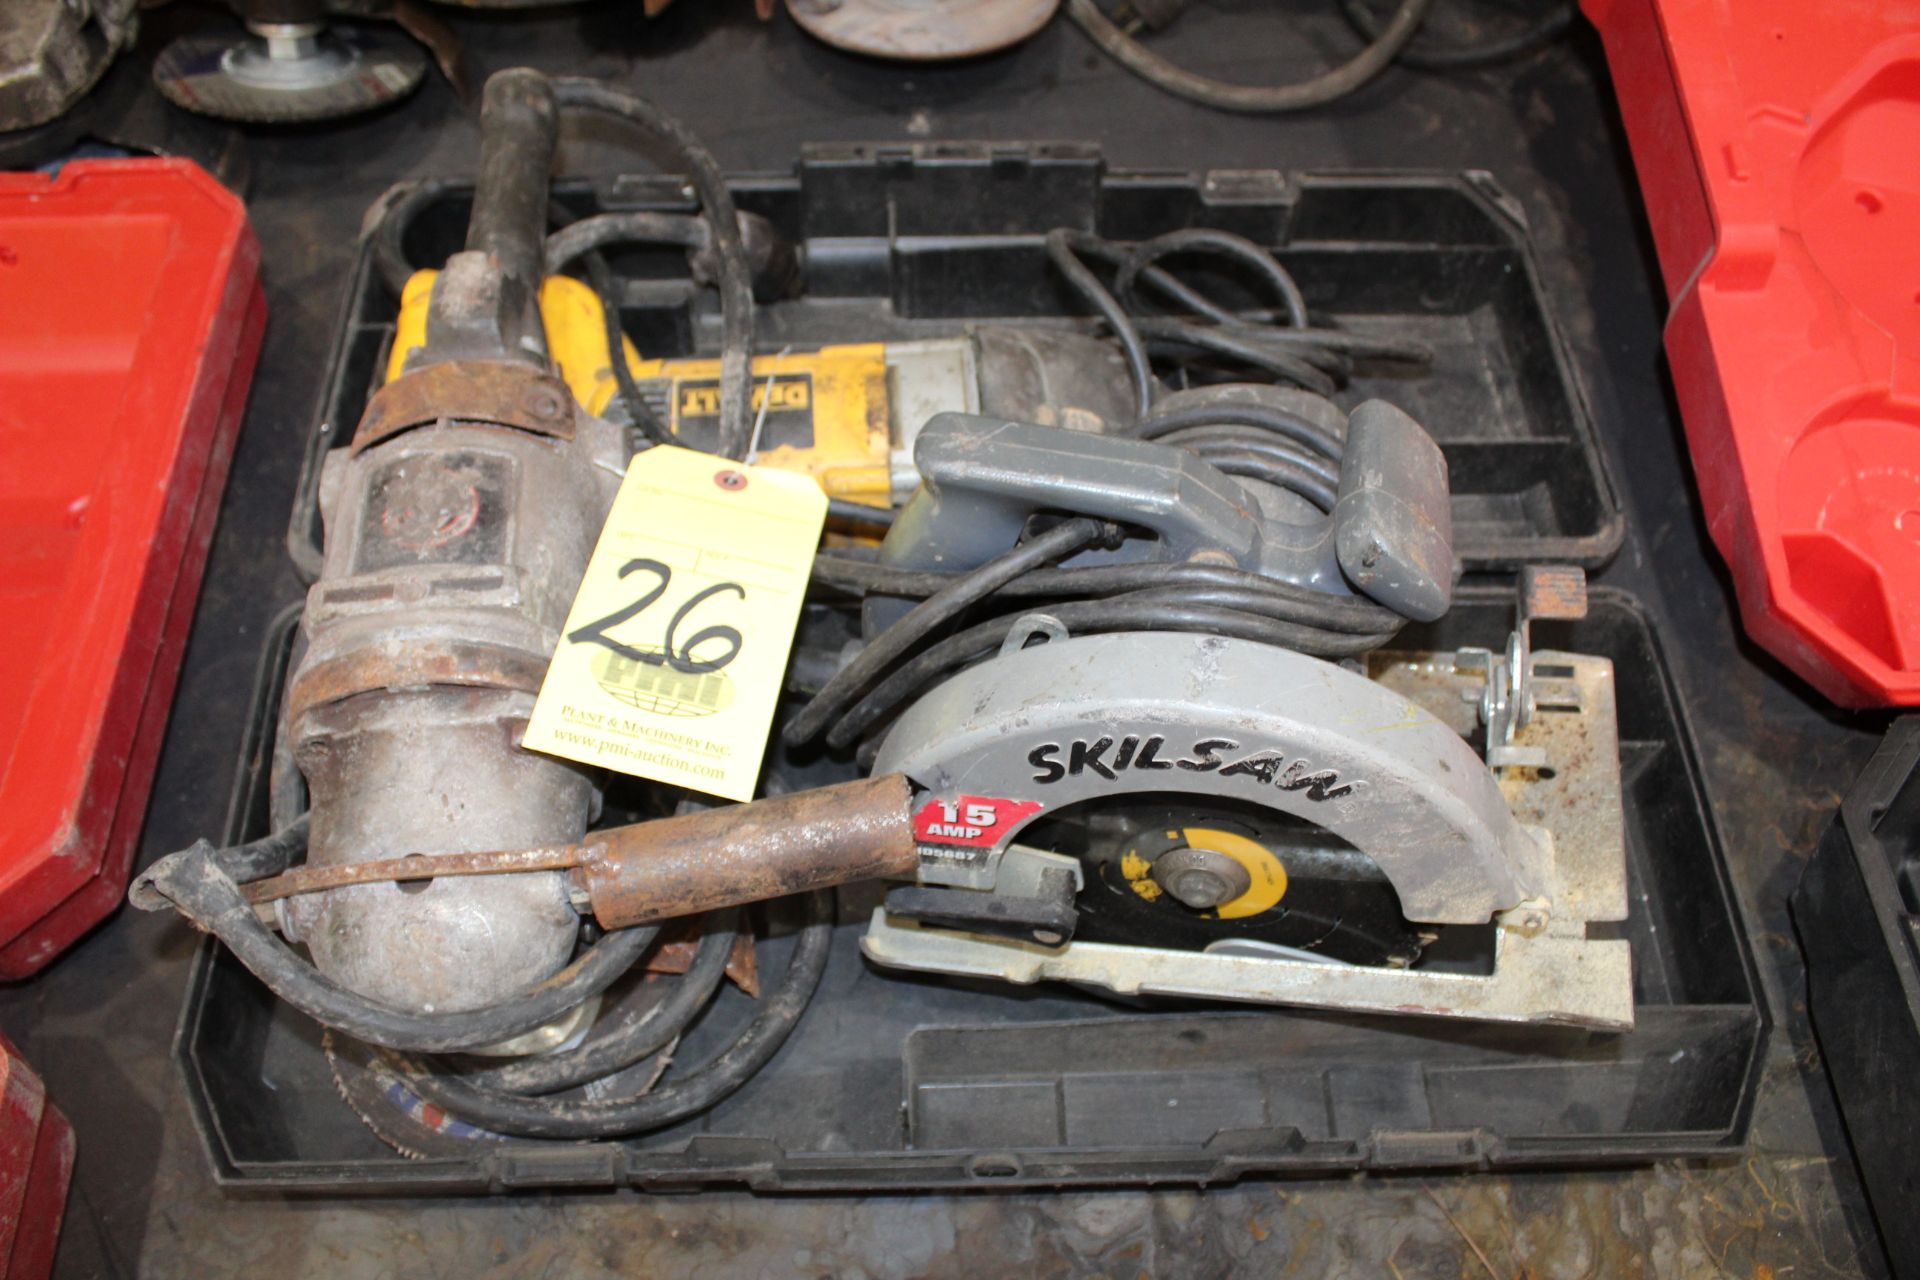 LOT CONSISTING OF: angle grinder, circular saw, reciprocating saw (all electric)